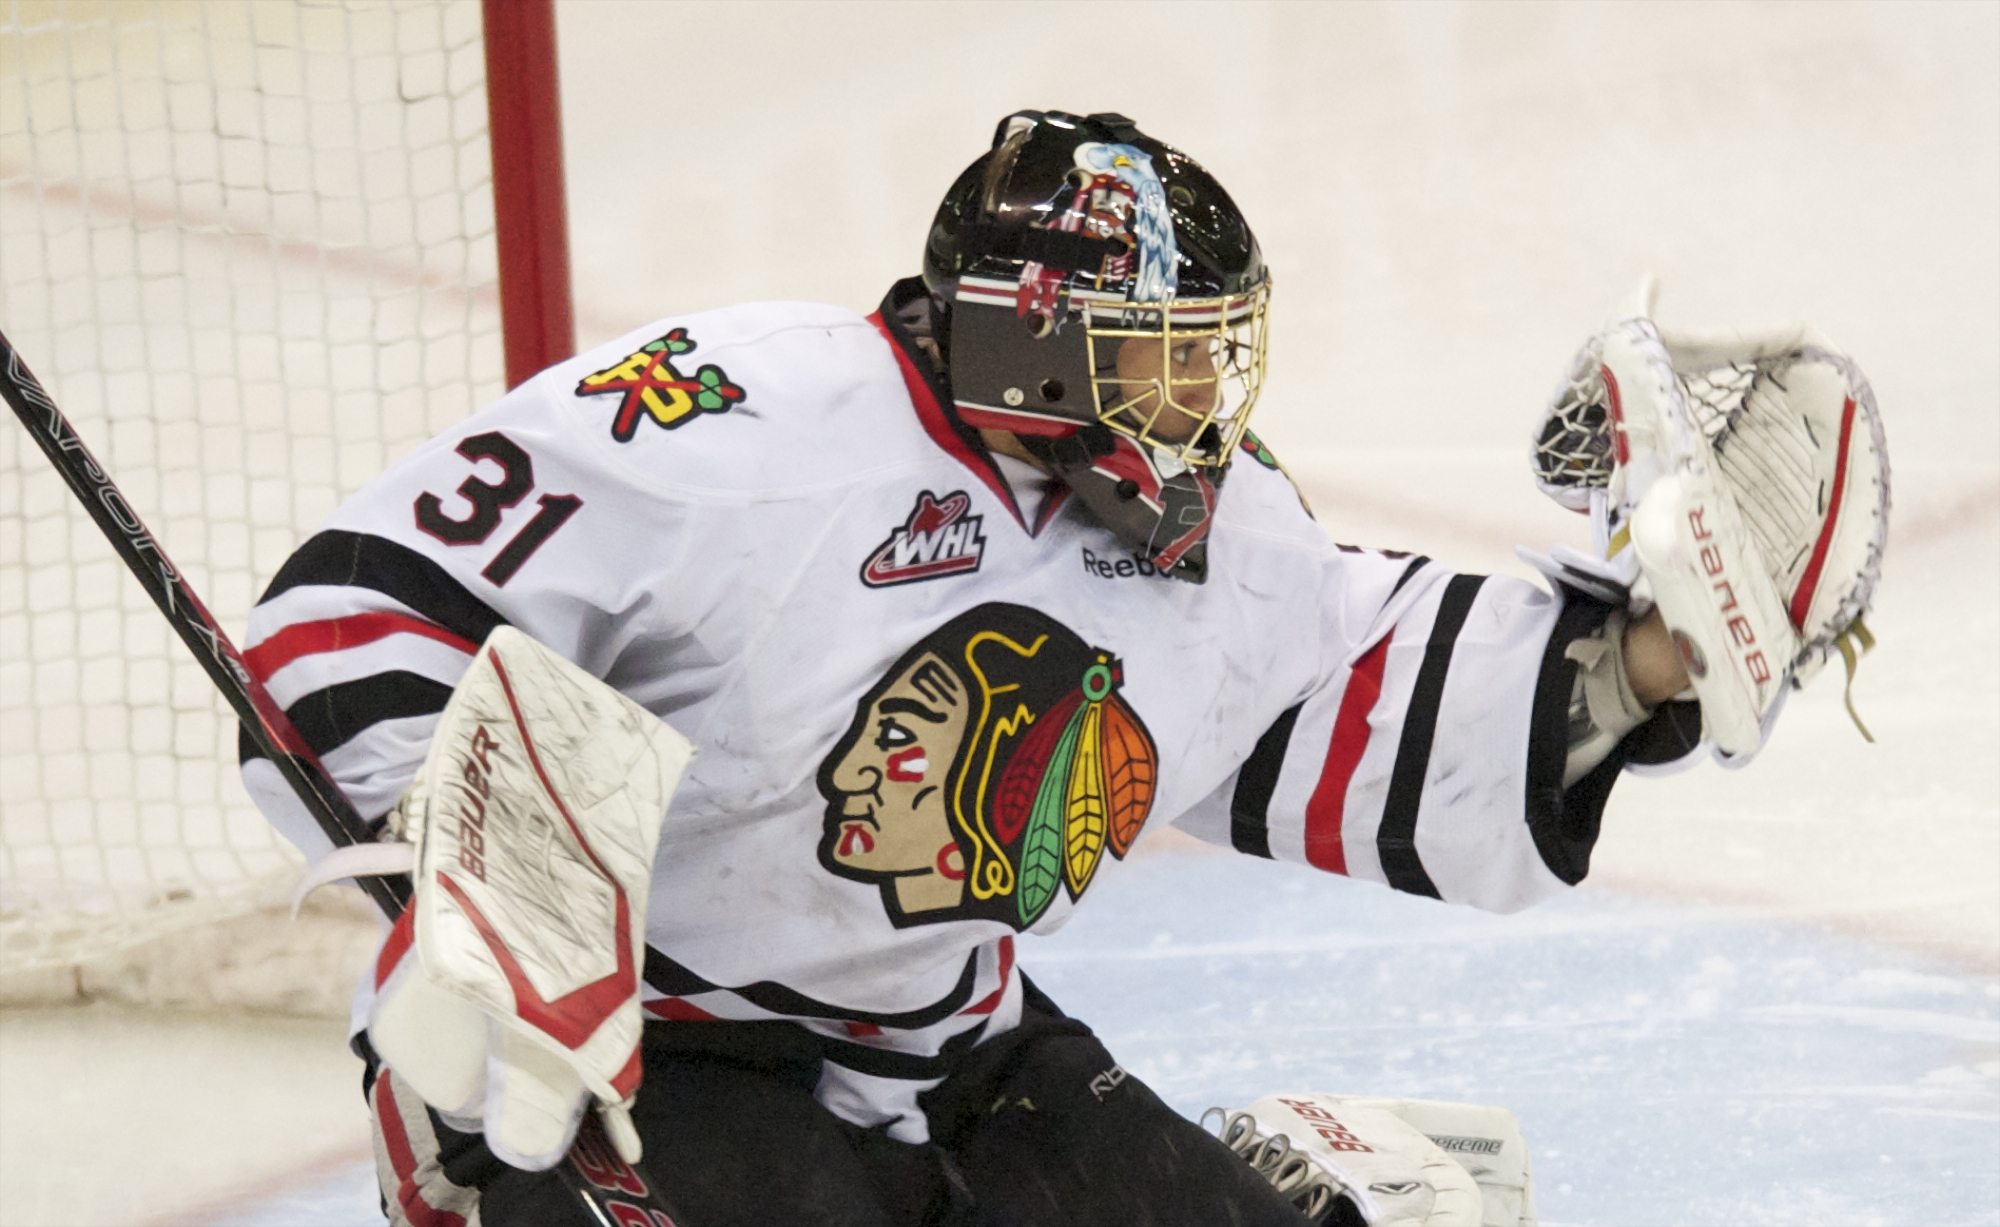 Portland Winterhawks goaltender Mac Carruth makes a save against the Kamloops Blazers during Game 7 of their WHL Western Conference semifinal series Wednesday at Memorial Coliseum in Portland.